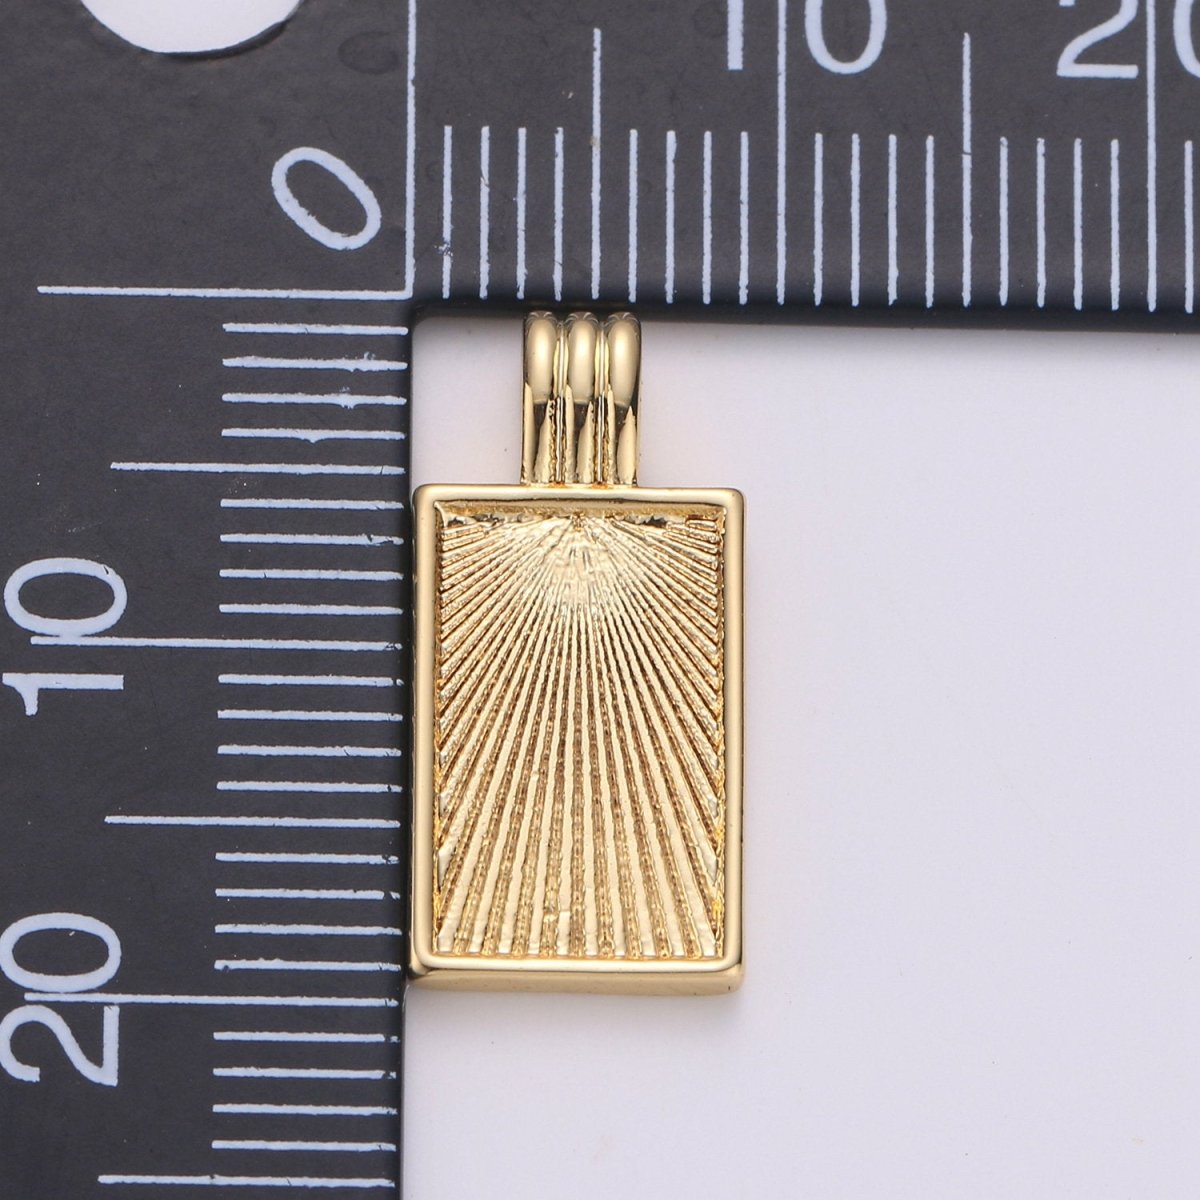 Dainty Gold Medallion Charm 24k Gold Filled Rectangle Pendant Gold Sunburst Charm Necklace Component Supply Geometric Jewelry D-075 I-671 - DLUXCA